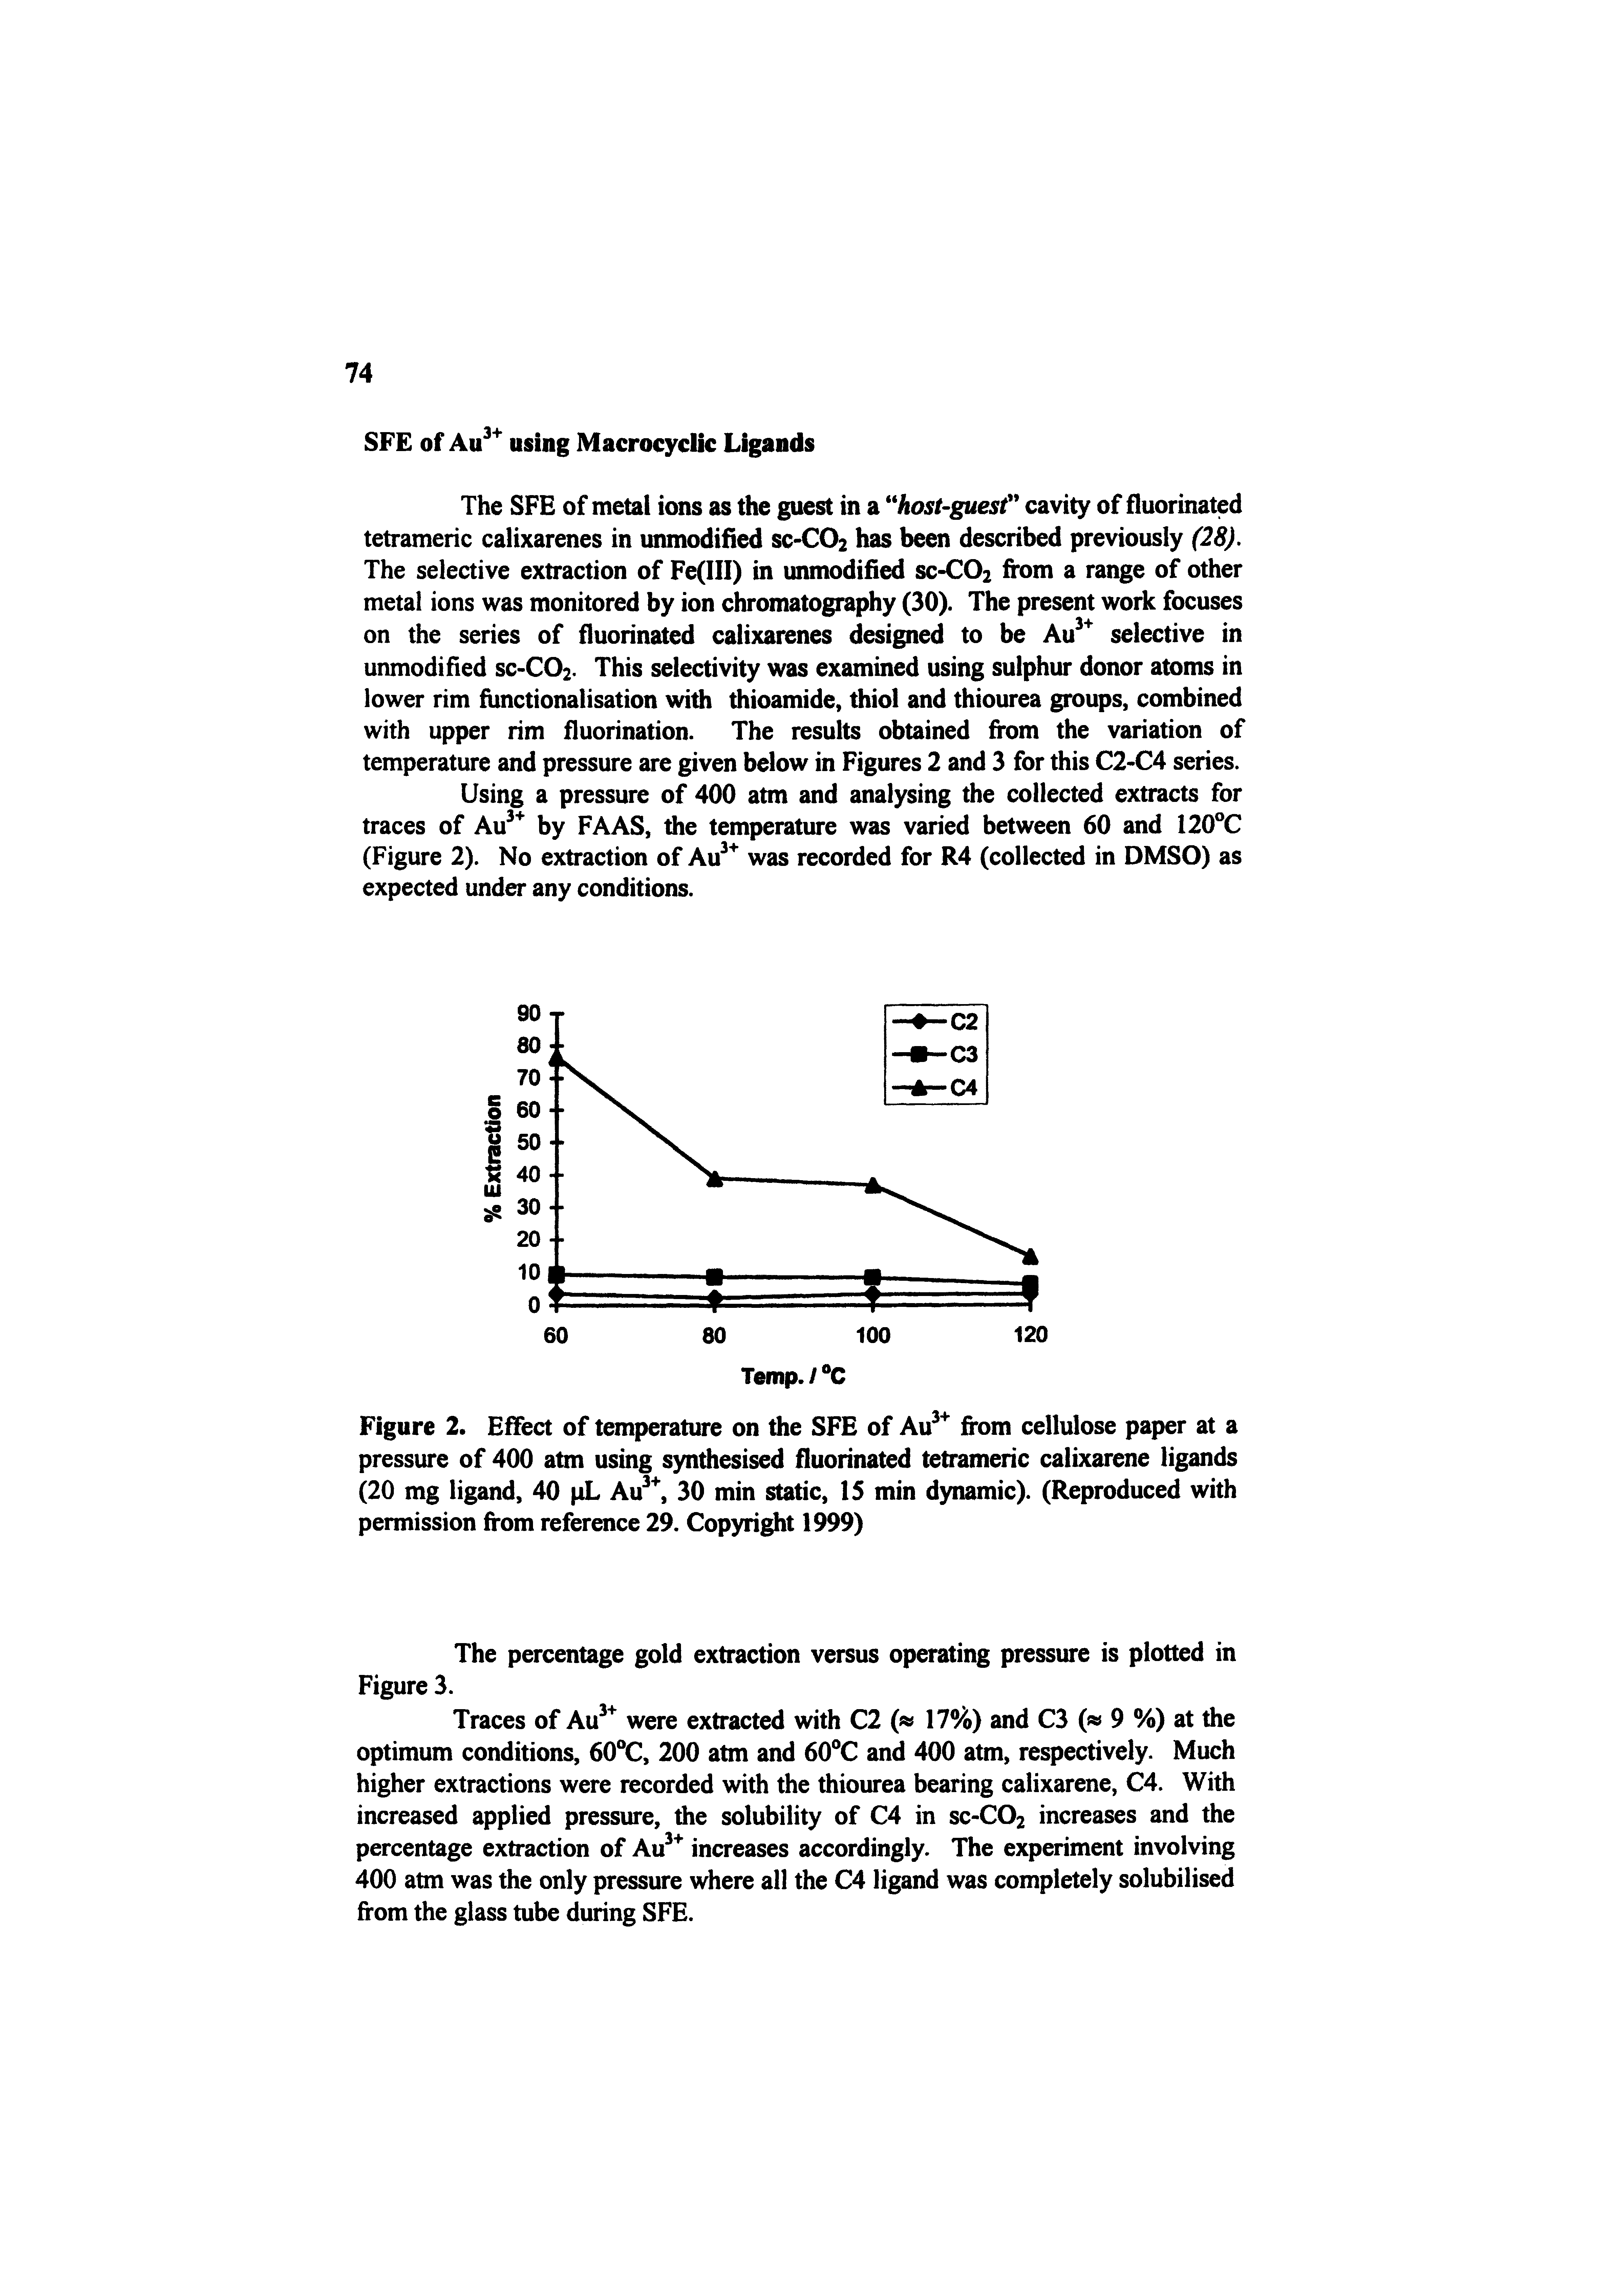 Figure 2. Effect of temperature on the SFE of Au from cellulose paper at a pressure of 400 atm using synthesised fluorinated tetrameric calixarene ligands (20 mg ligand, 40 pL Au, 30 min static, 15 min dynamic). (Reproduced with permission from reference 29. Copyright 1999)...